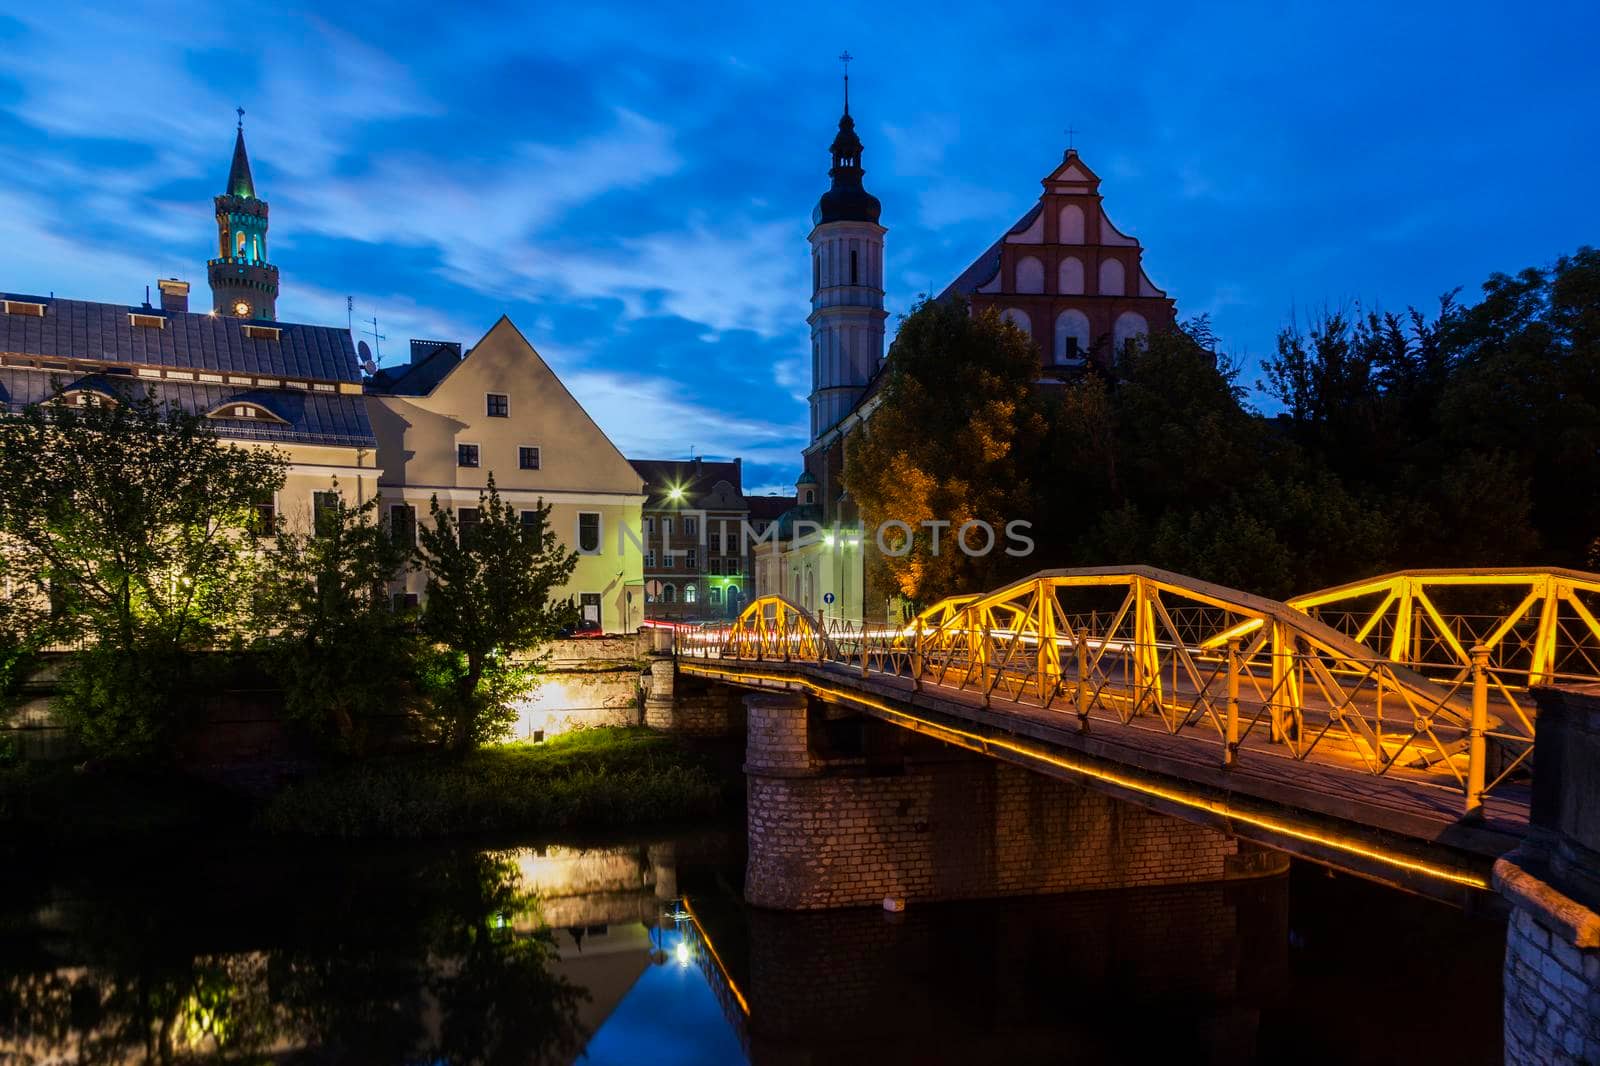 Old town of Opole across Oder River by benkrut